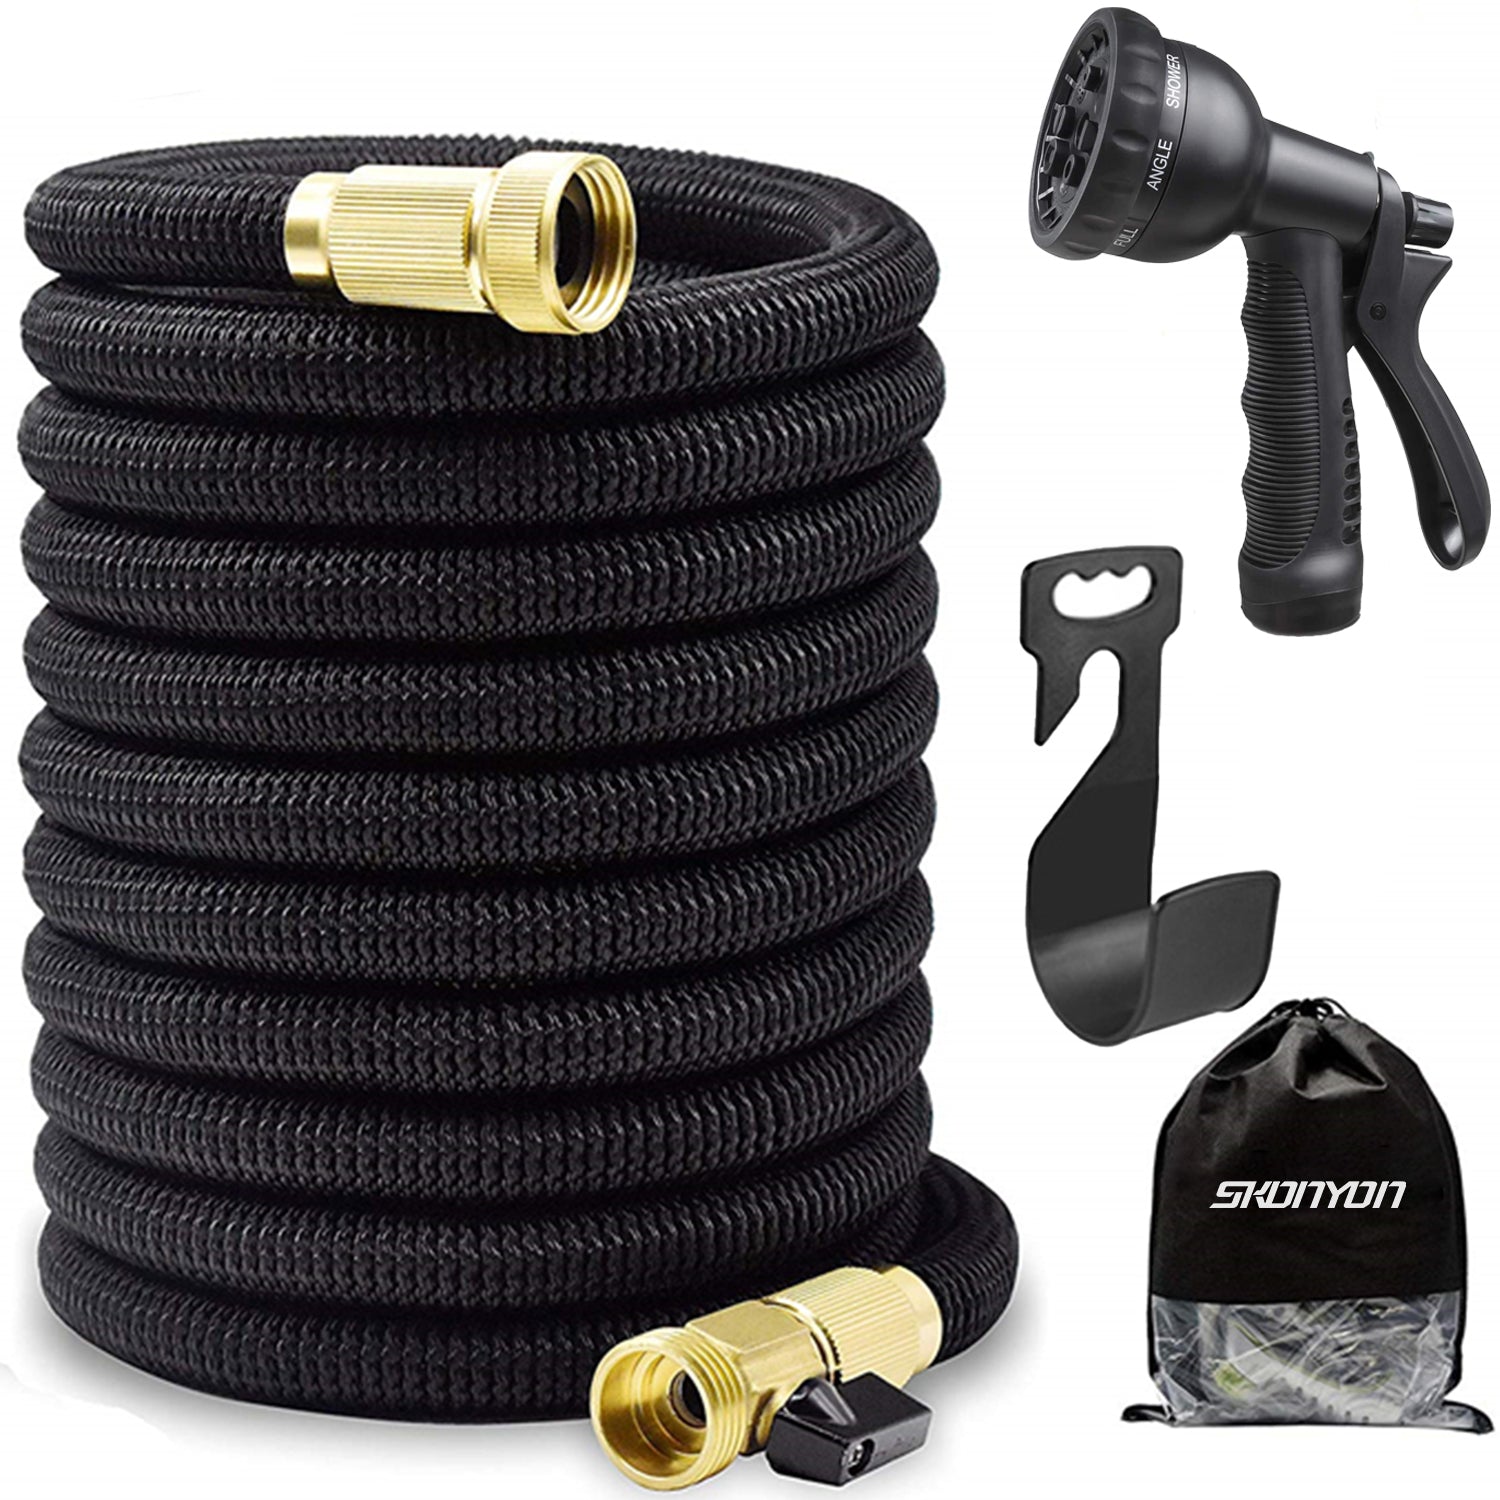 SKONYON Expandable Garden Hose 50FT Water Hose with 8 Function Nozzle